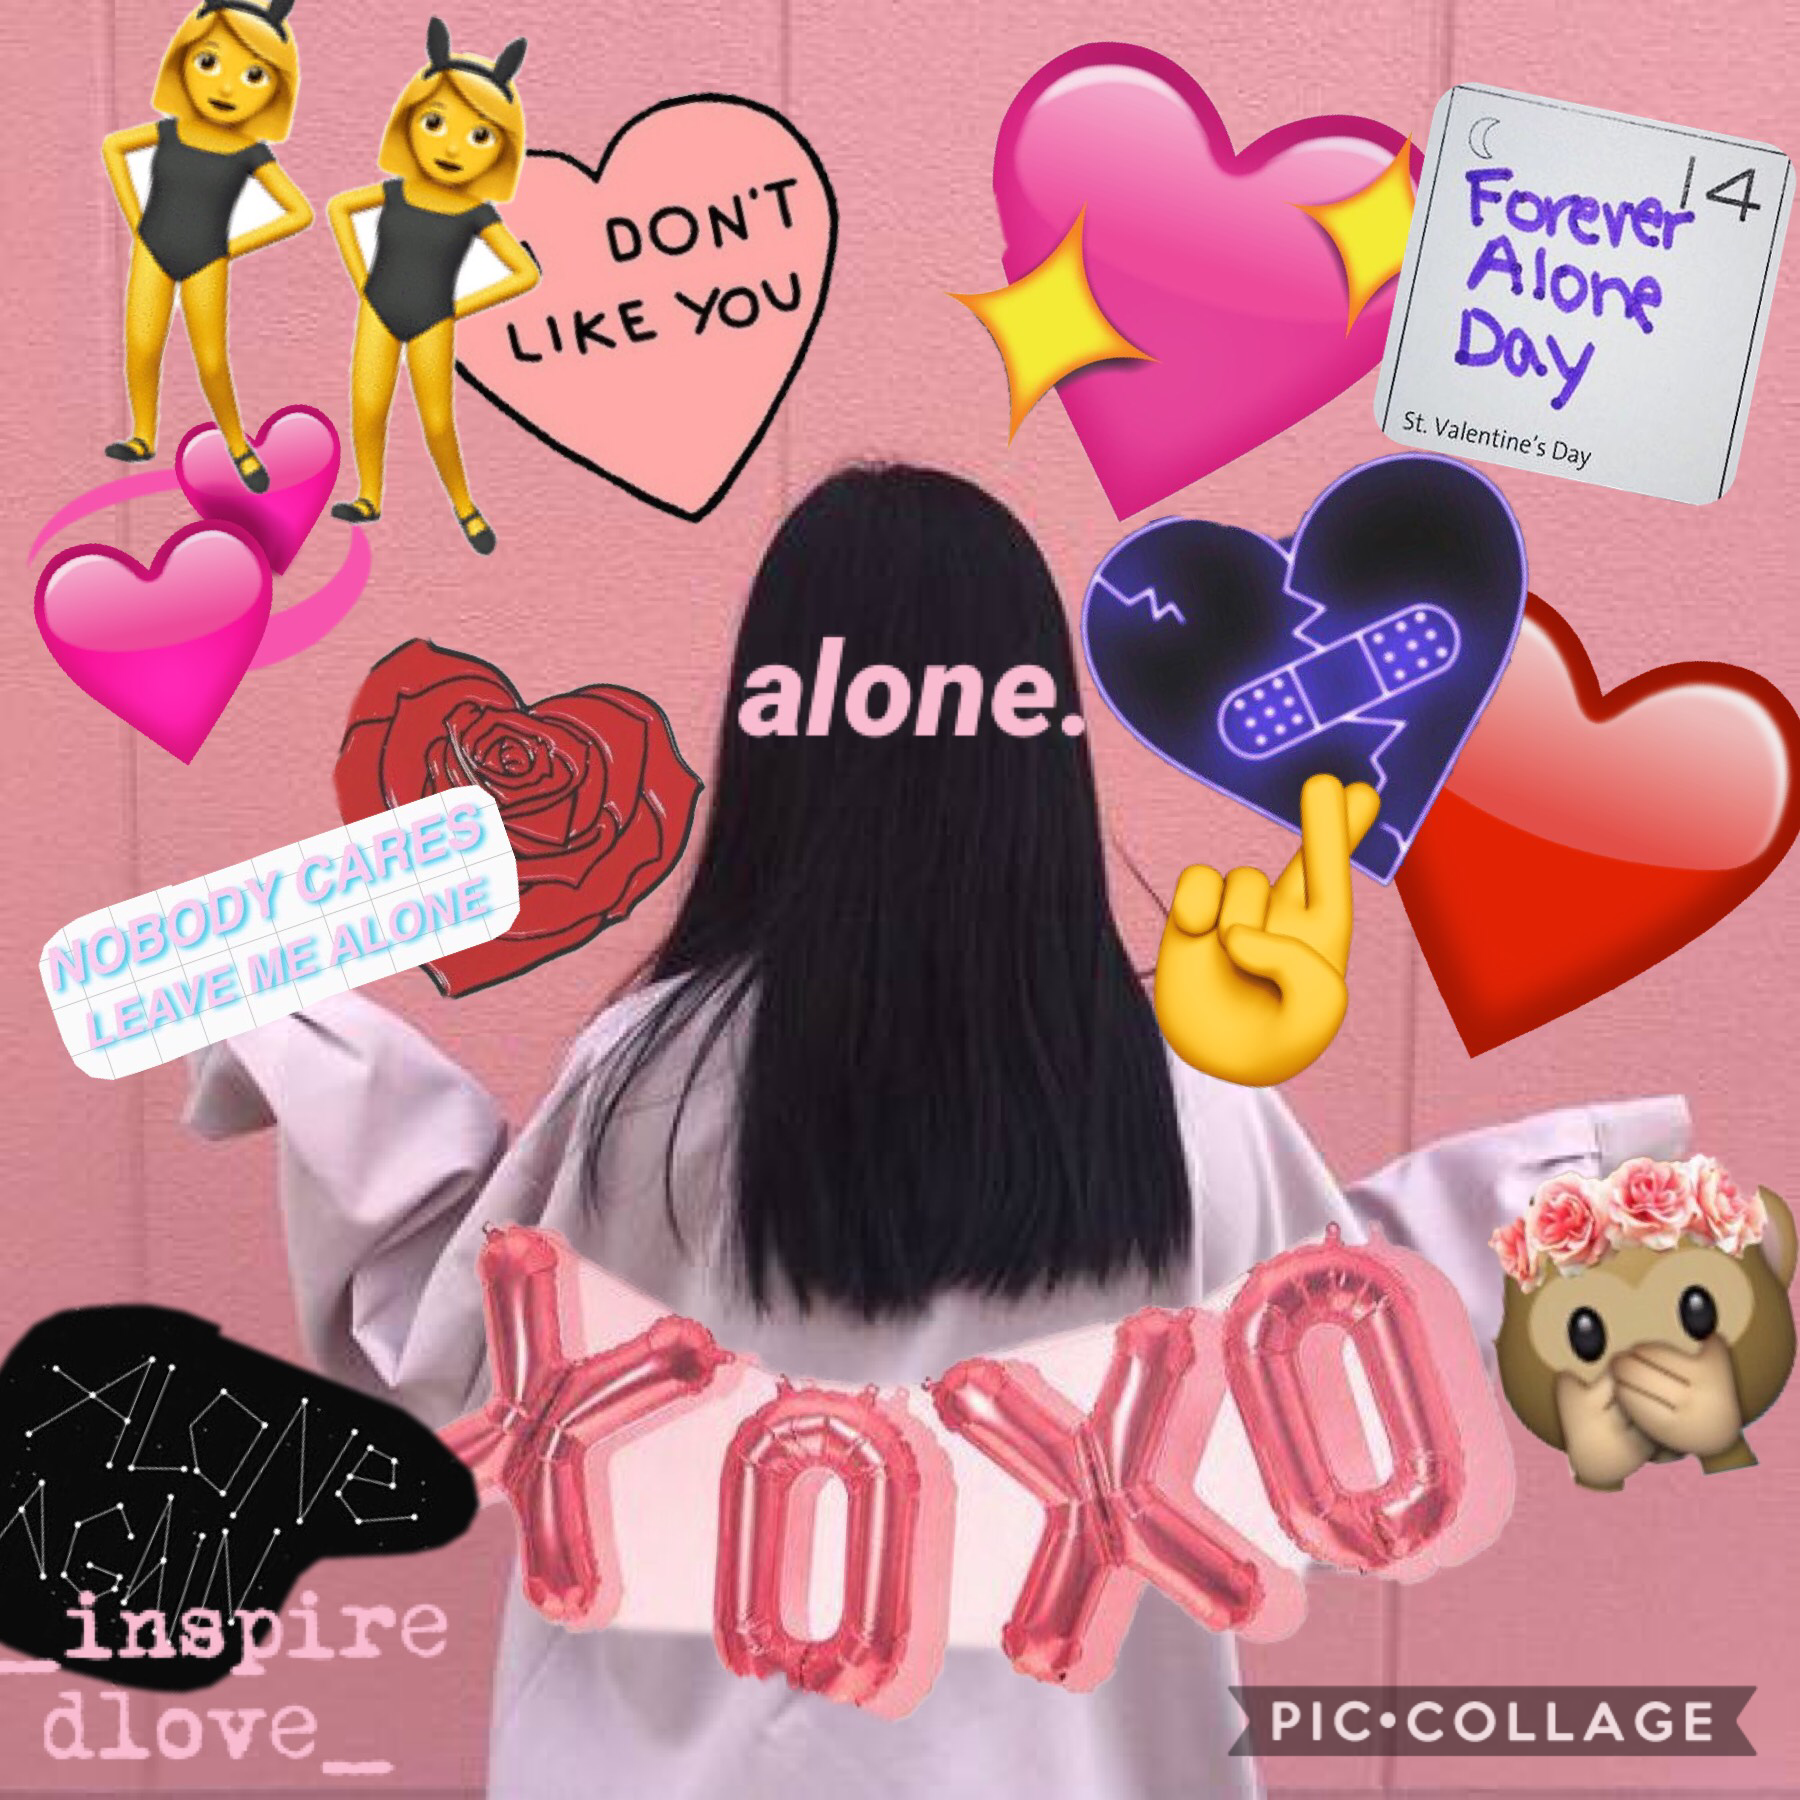 Happy Valentine’s Day!!! Hope you had a wonderful day. I hope you had a date(unlike me💔) but if not that’s totally fine! We can be single Pringle’s together!! Anyways, have a good day/night💖